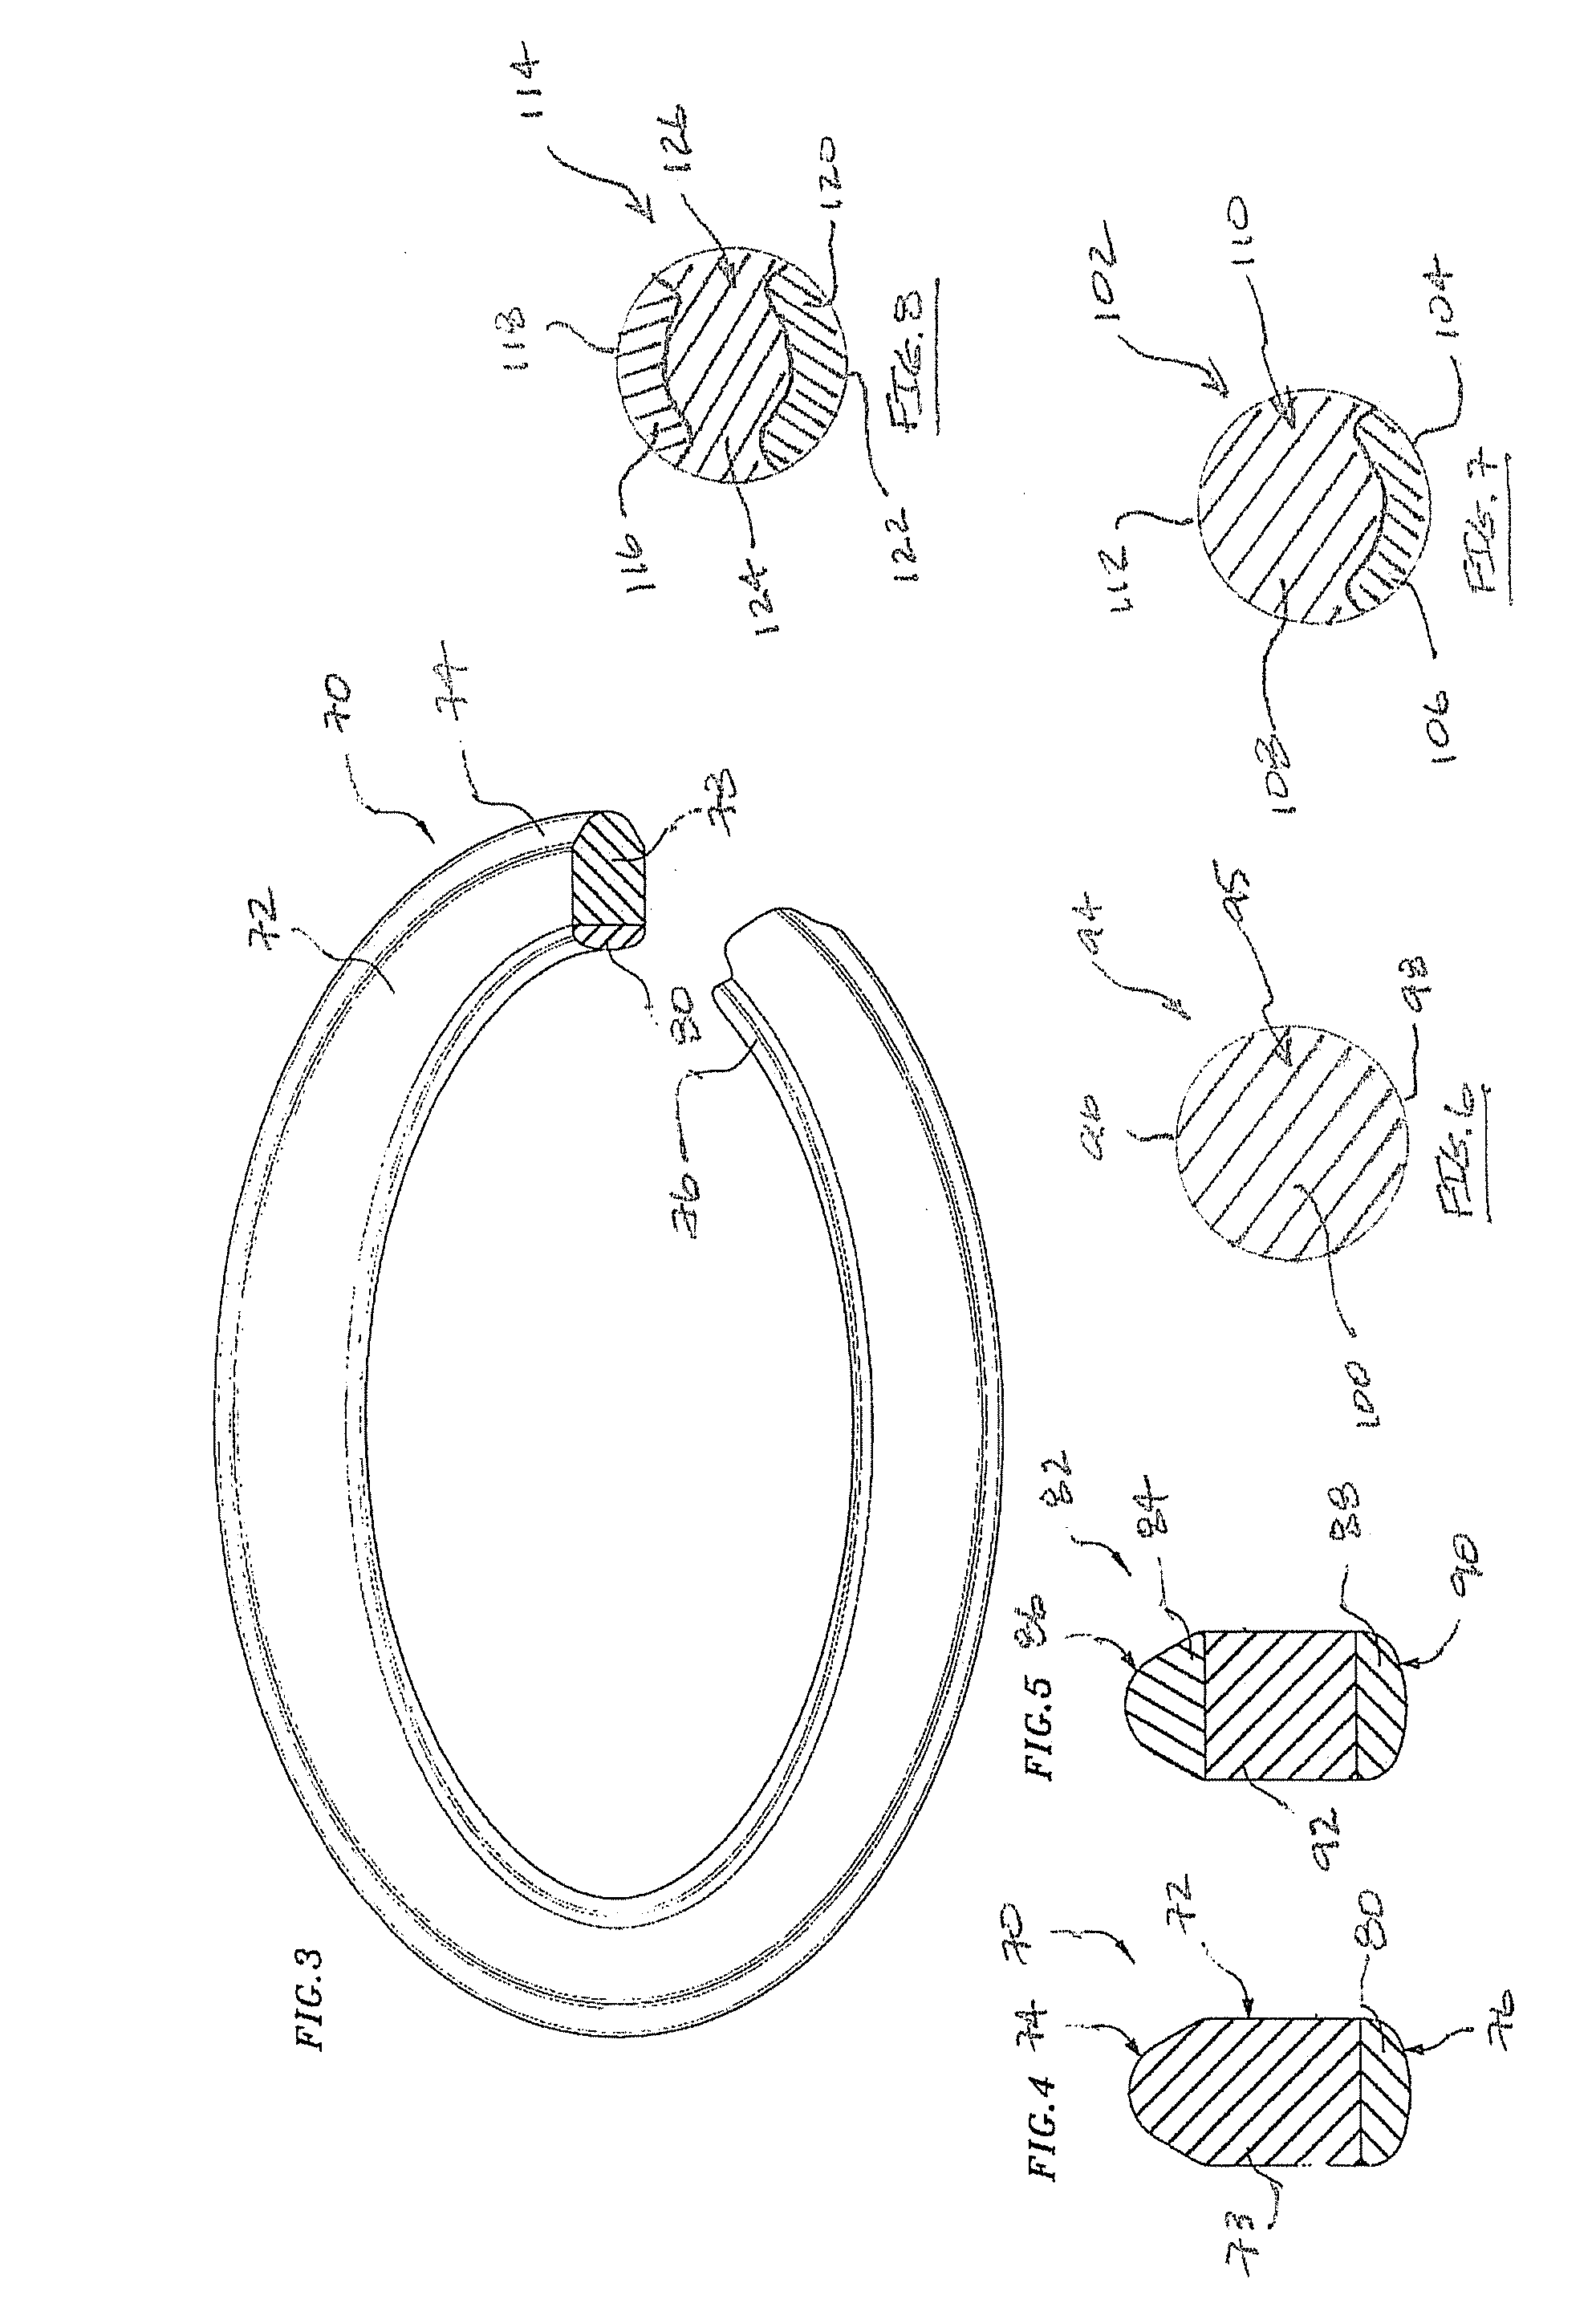 Seal comprising elastomeric composition with nanoparticles